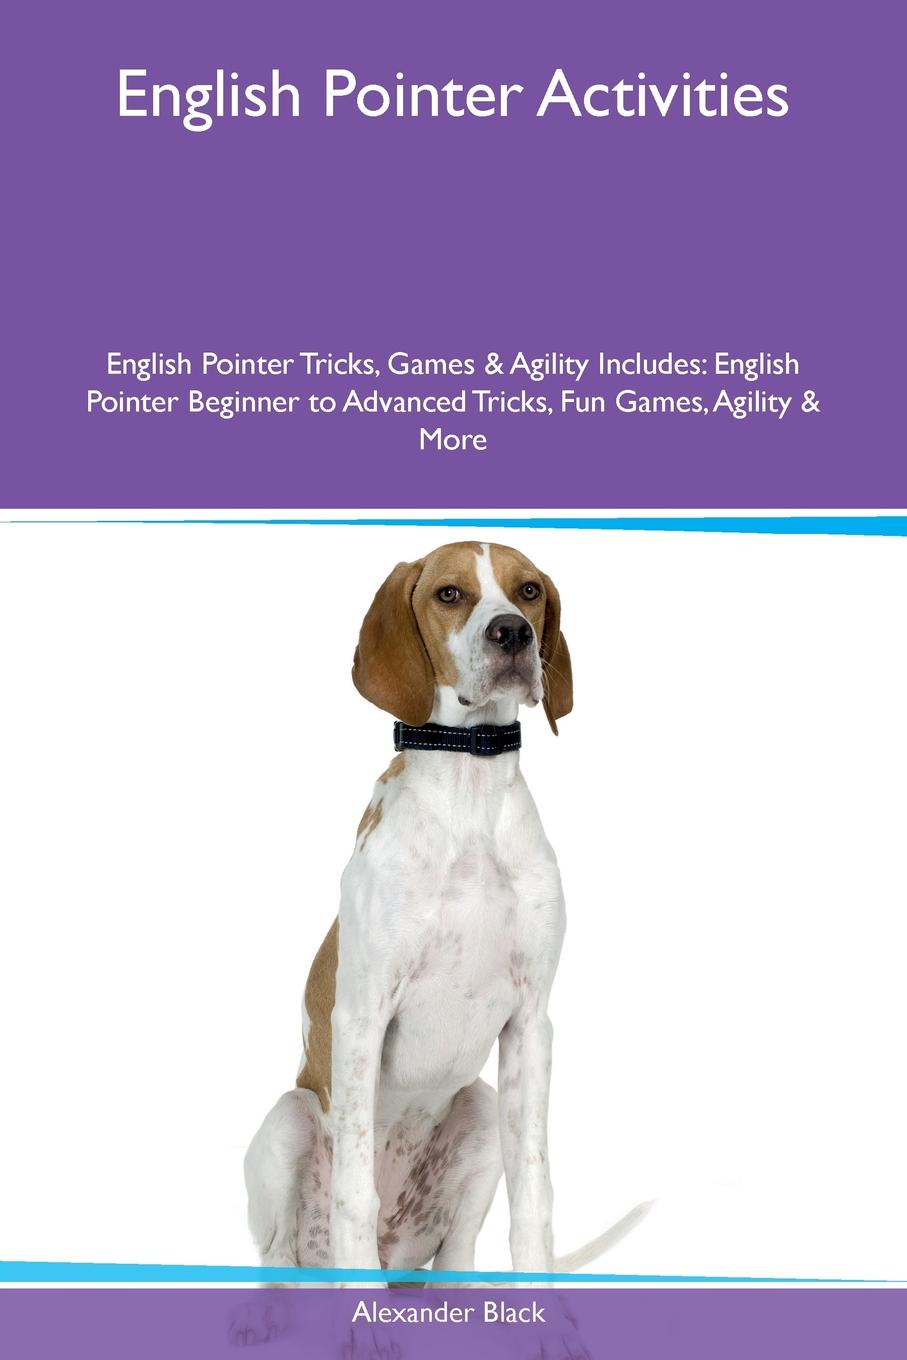 English Pointer Activities English Pointer Tricks, Games & Agility Includes. English Pointer Beginner to Advanced Tricks, Fun Games, Agility & More